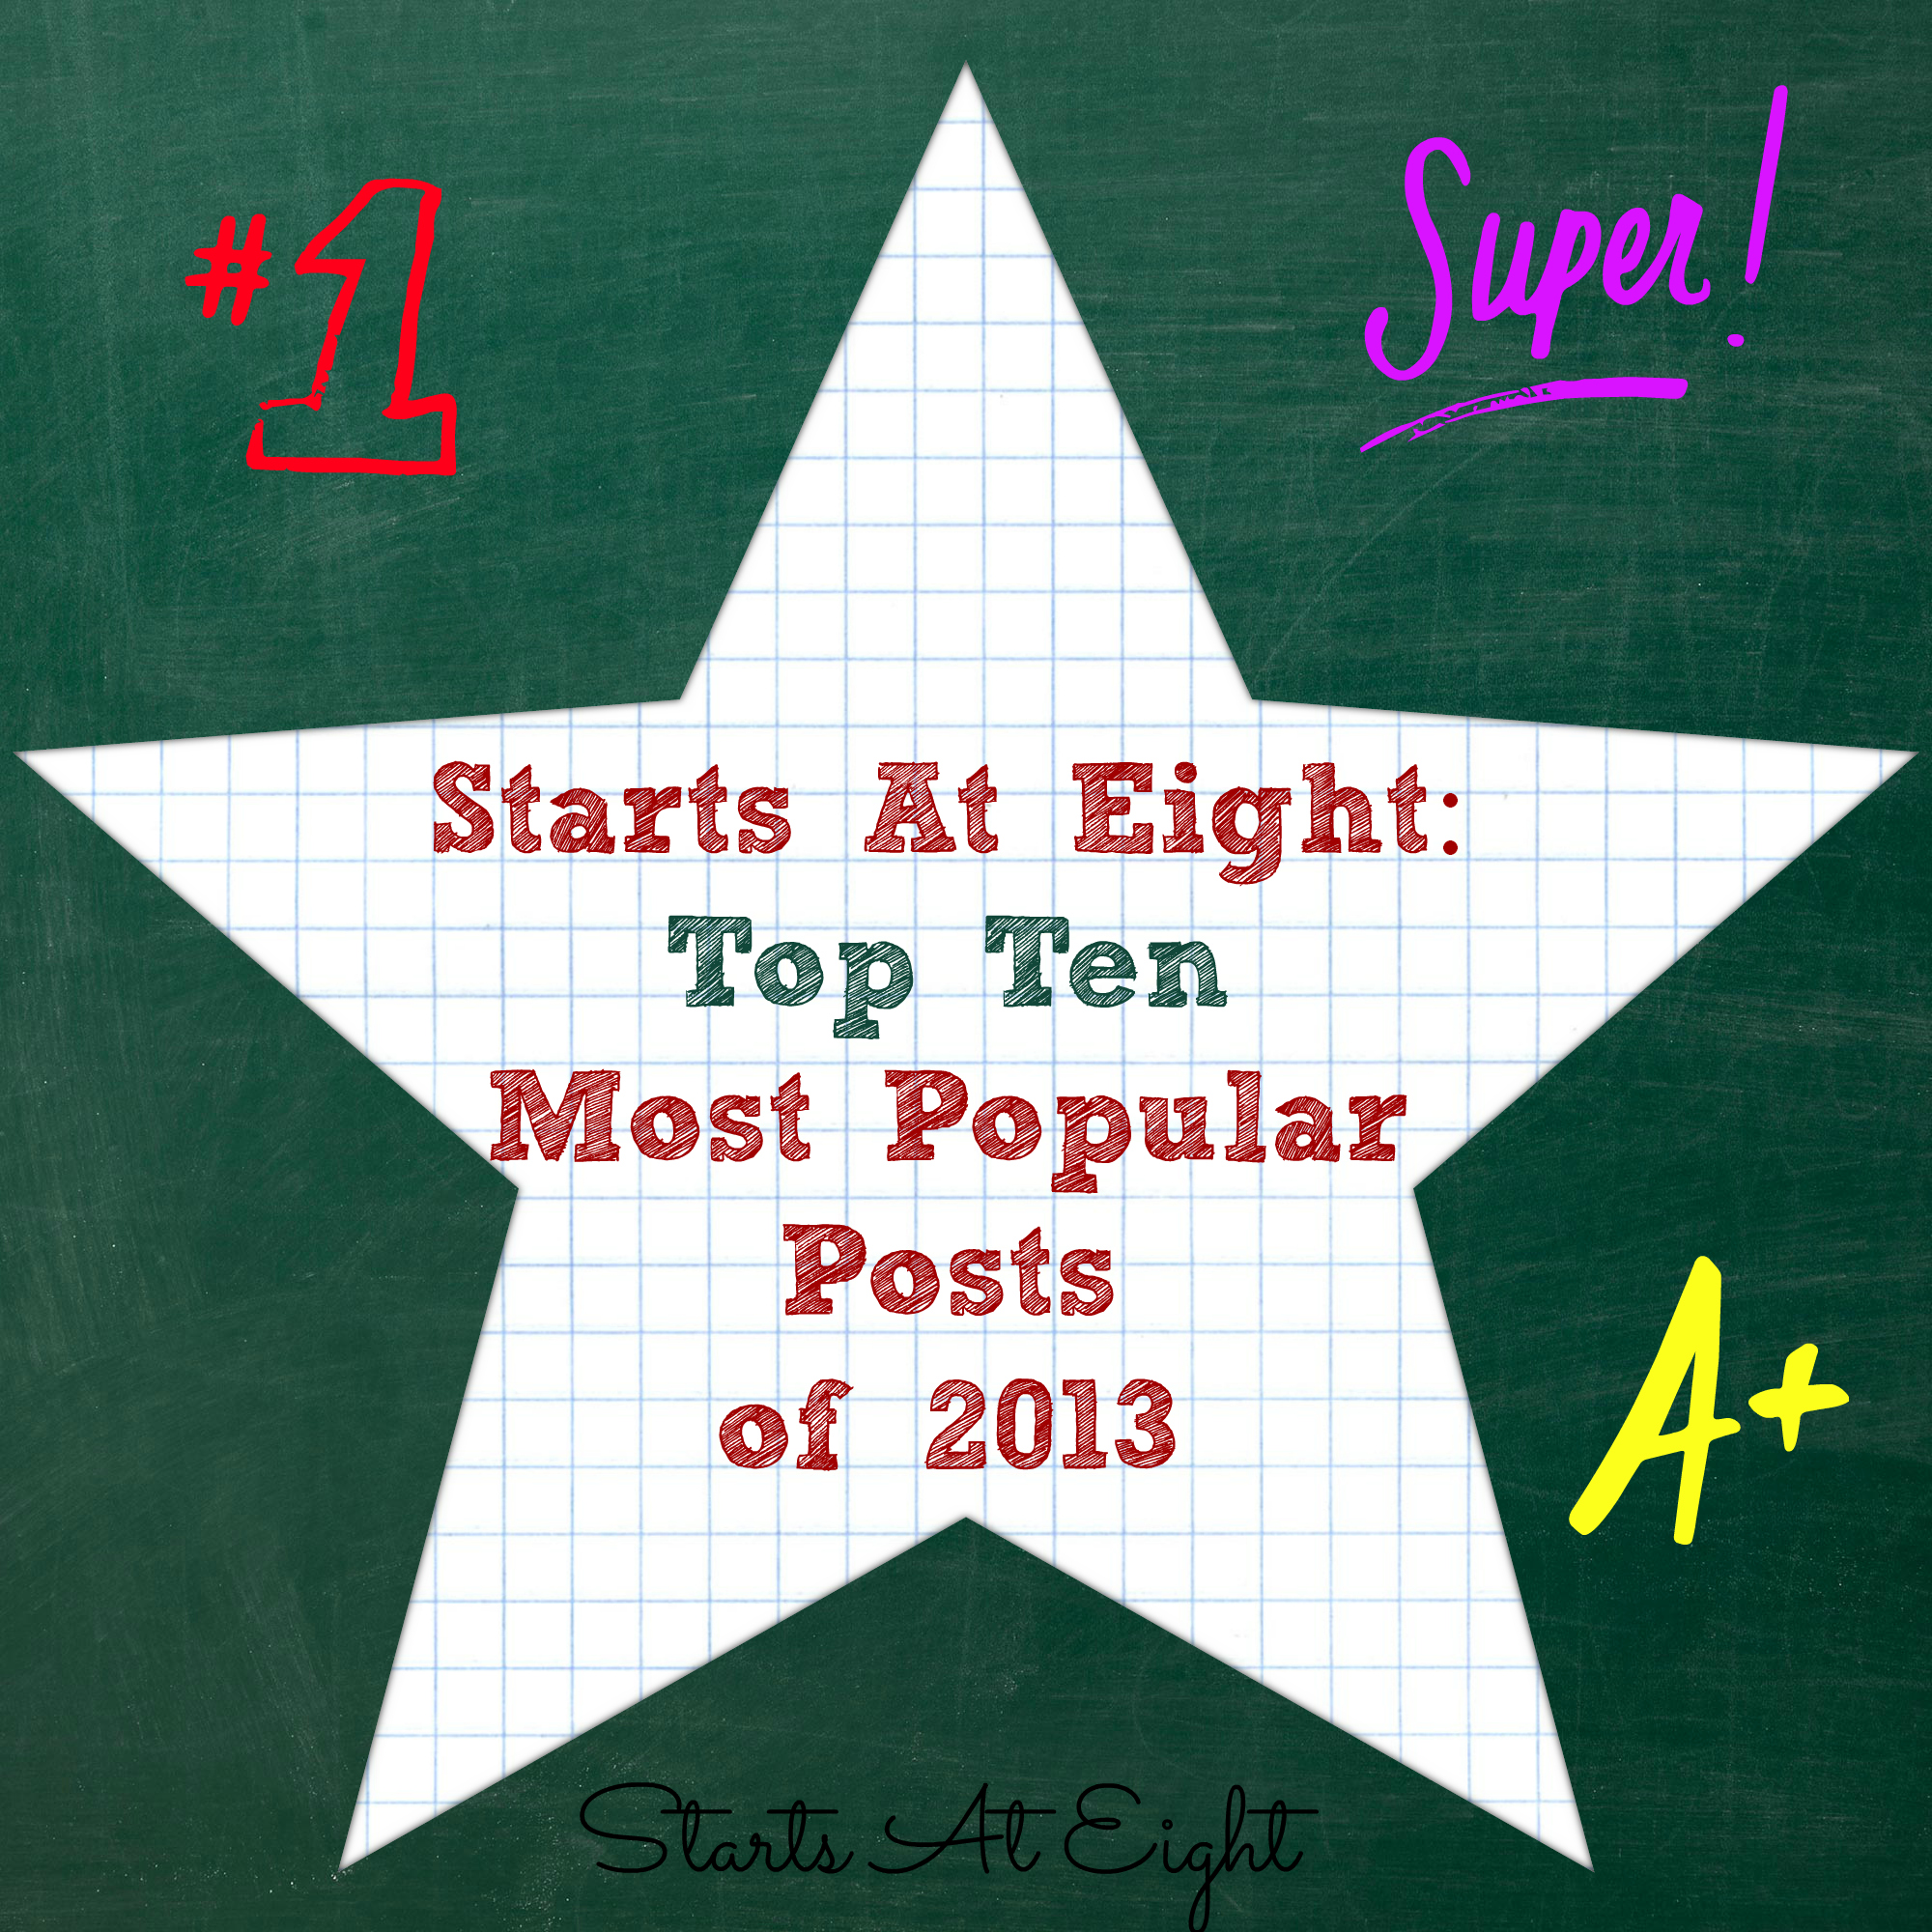 Starts At Eight: Top Ten Most Popular Posts of 2013